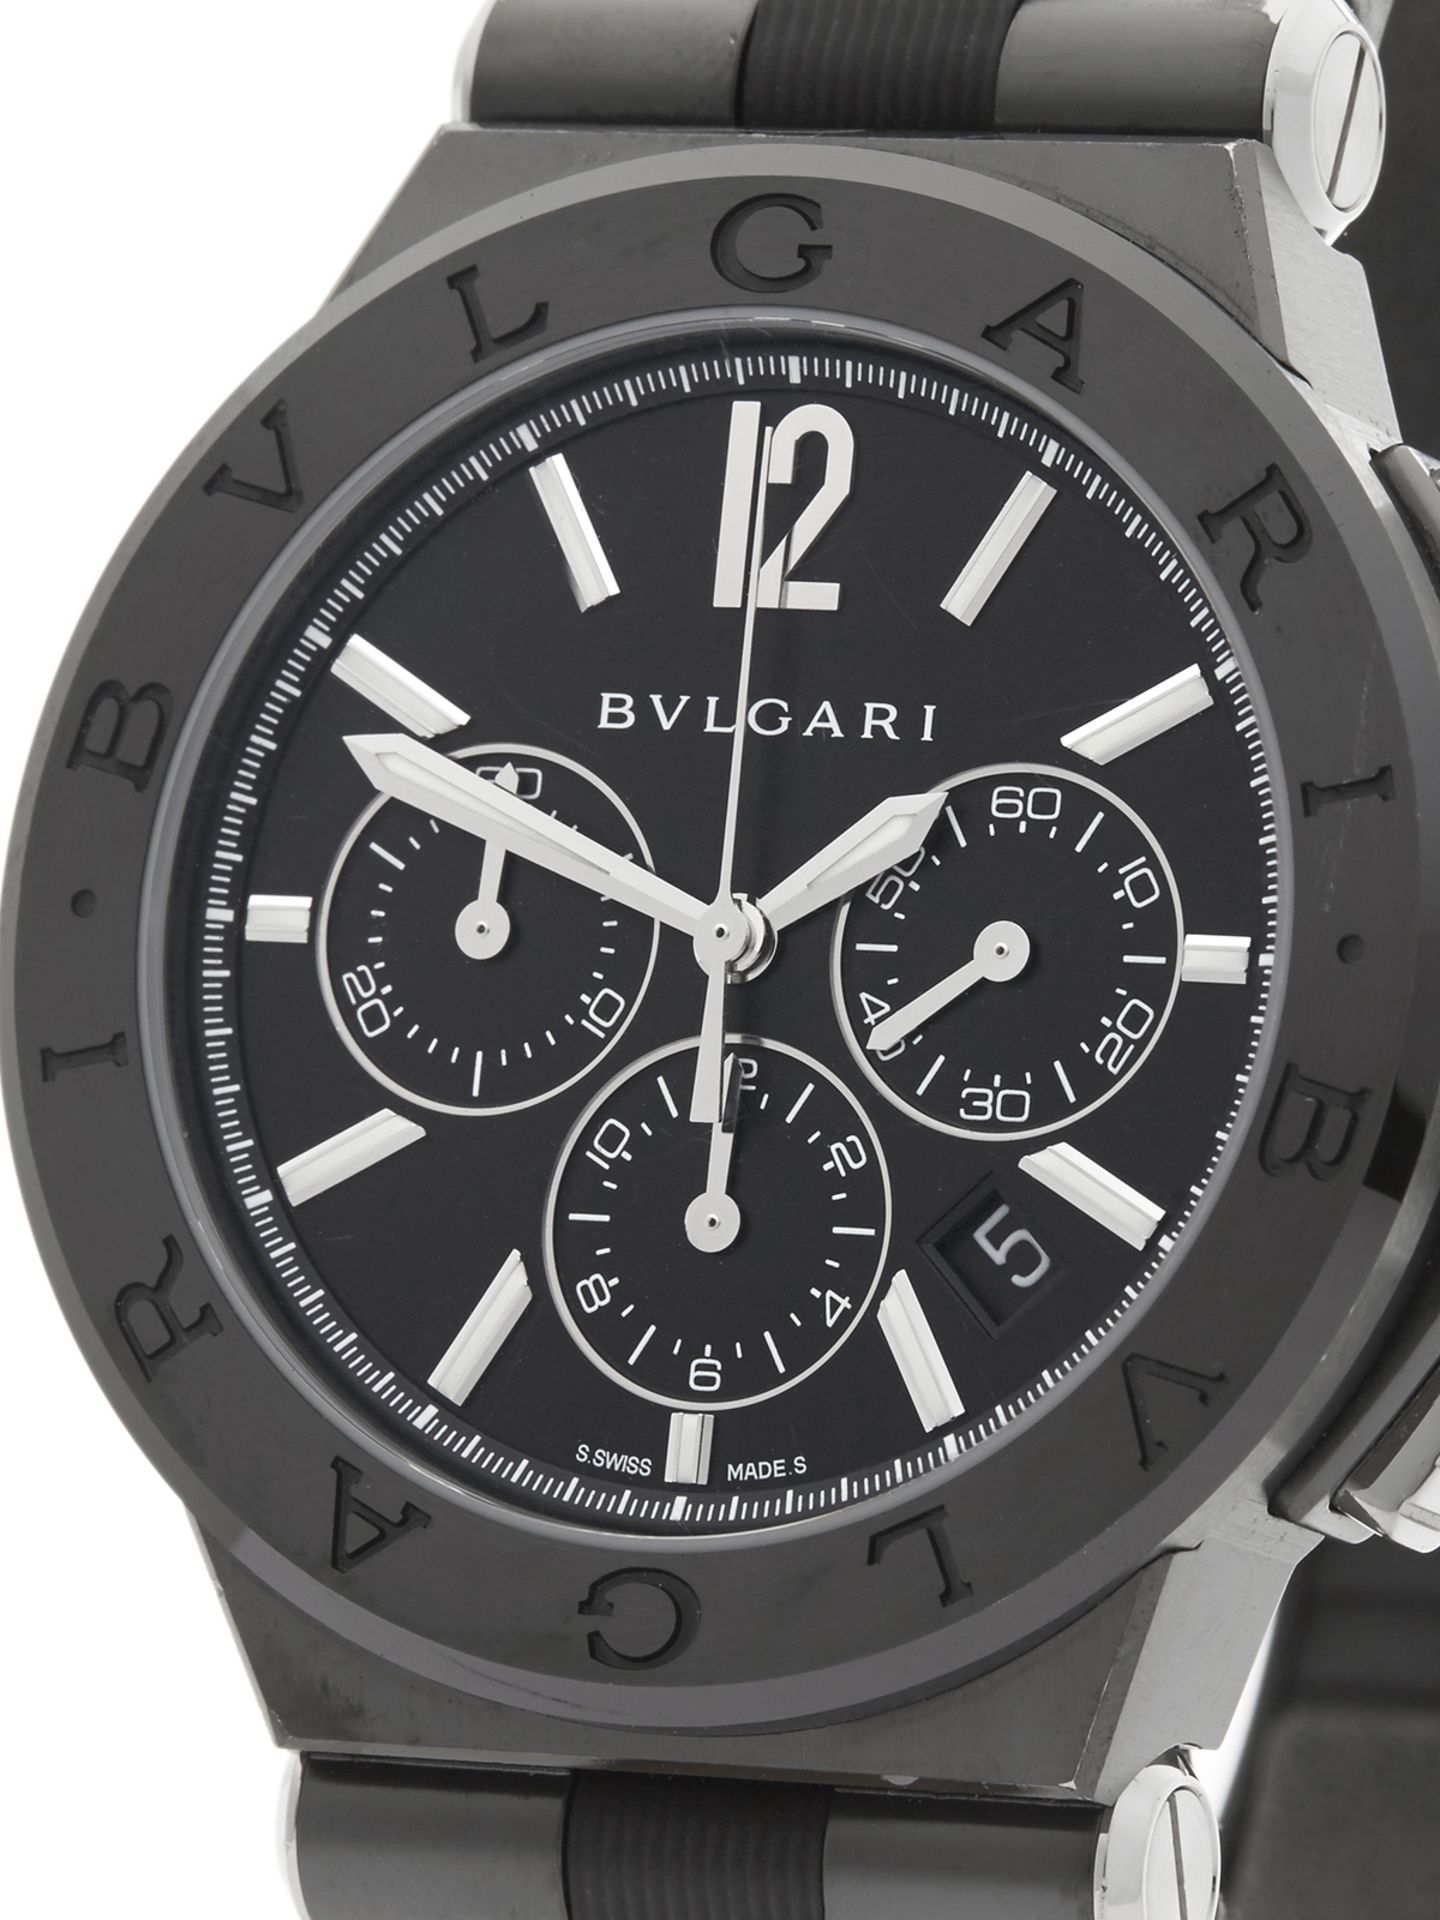 Bulgari Diagono Chronograph 42mm PVD Coated Stainless Steel DG 42BBSCVDCH - Image 3 of 9